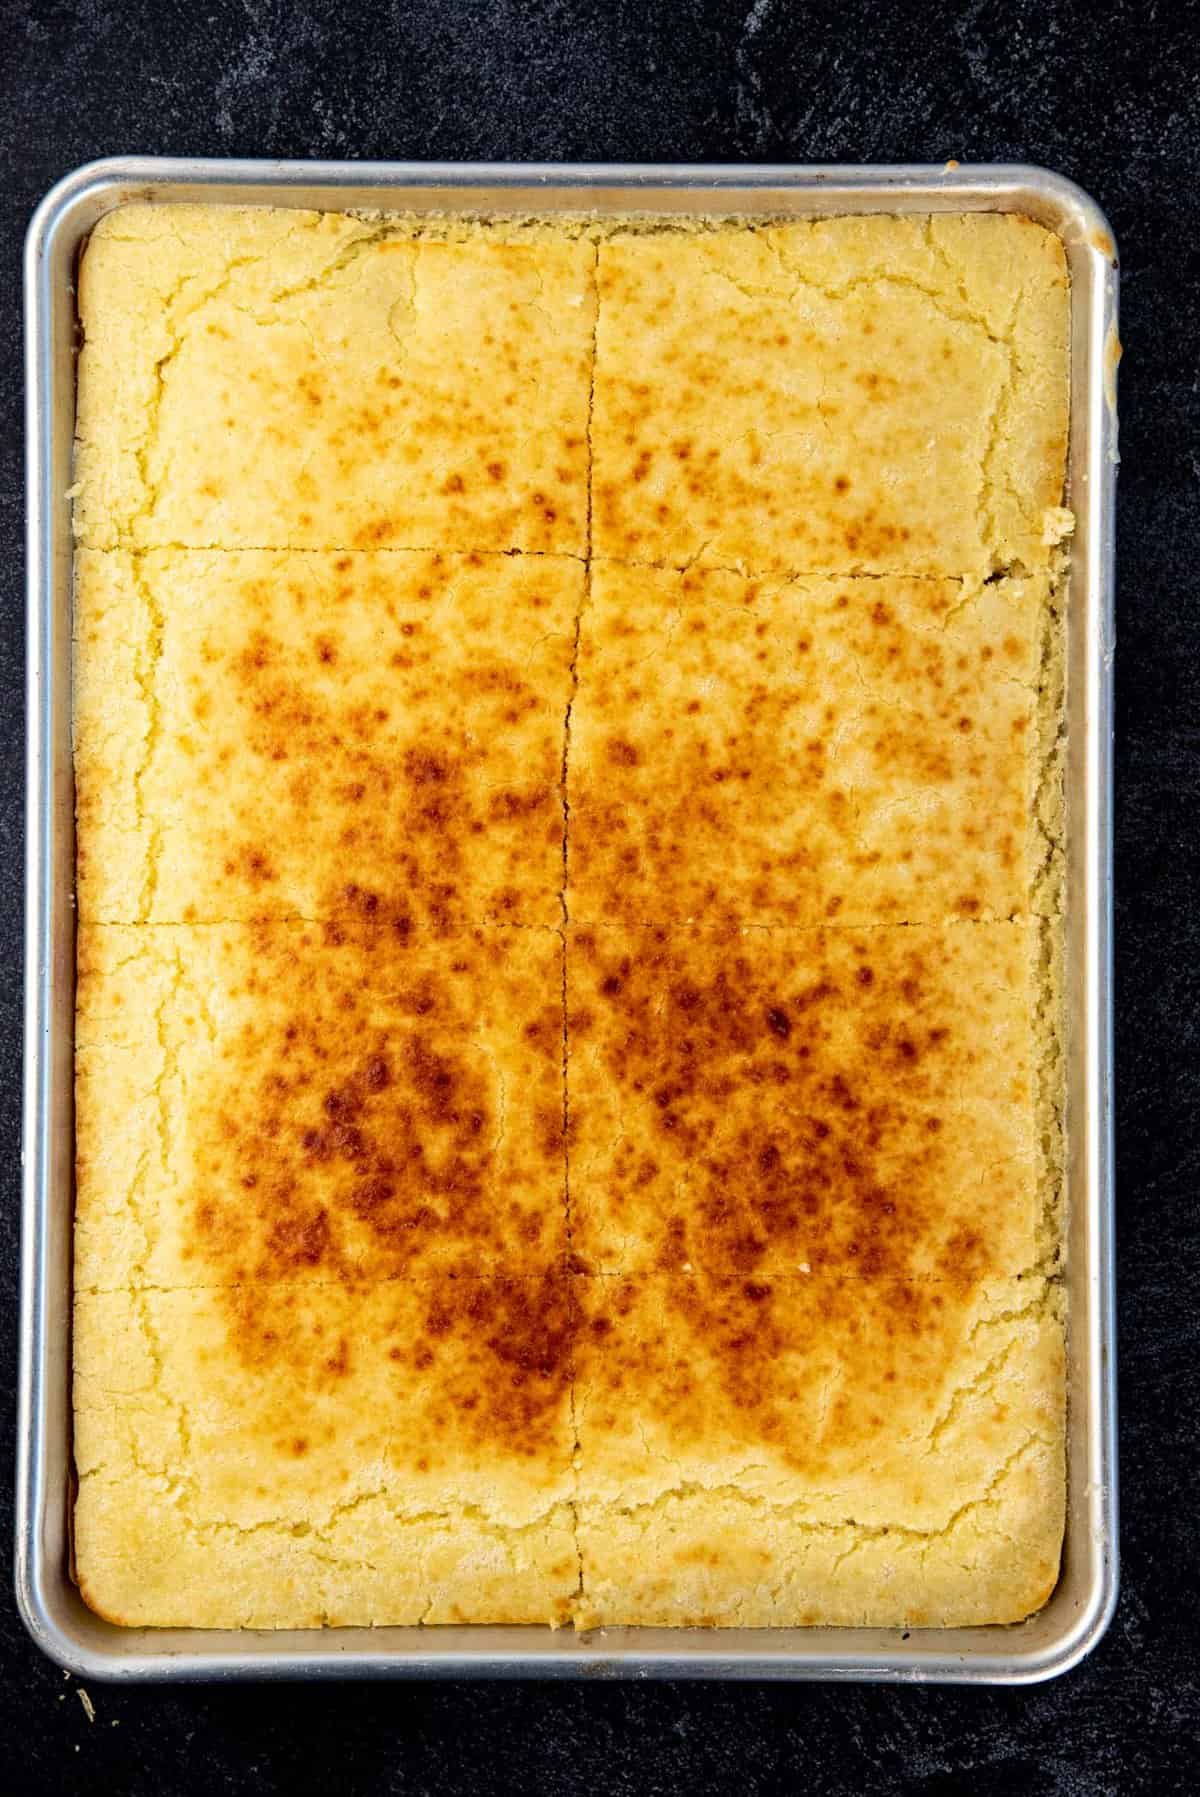 An overhead view of the sheet pan pancakes, after broiling to show the caramelized surface and then cut into 8 portions.